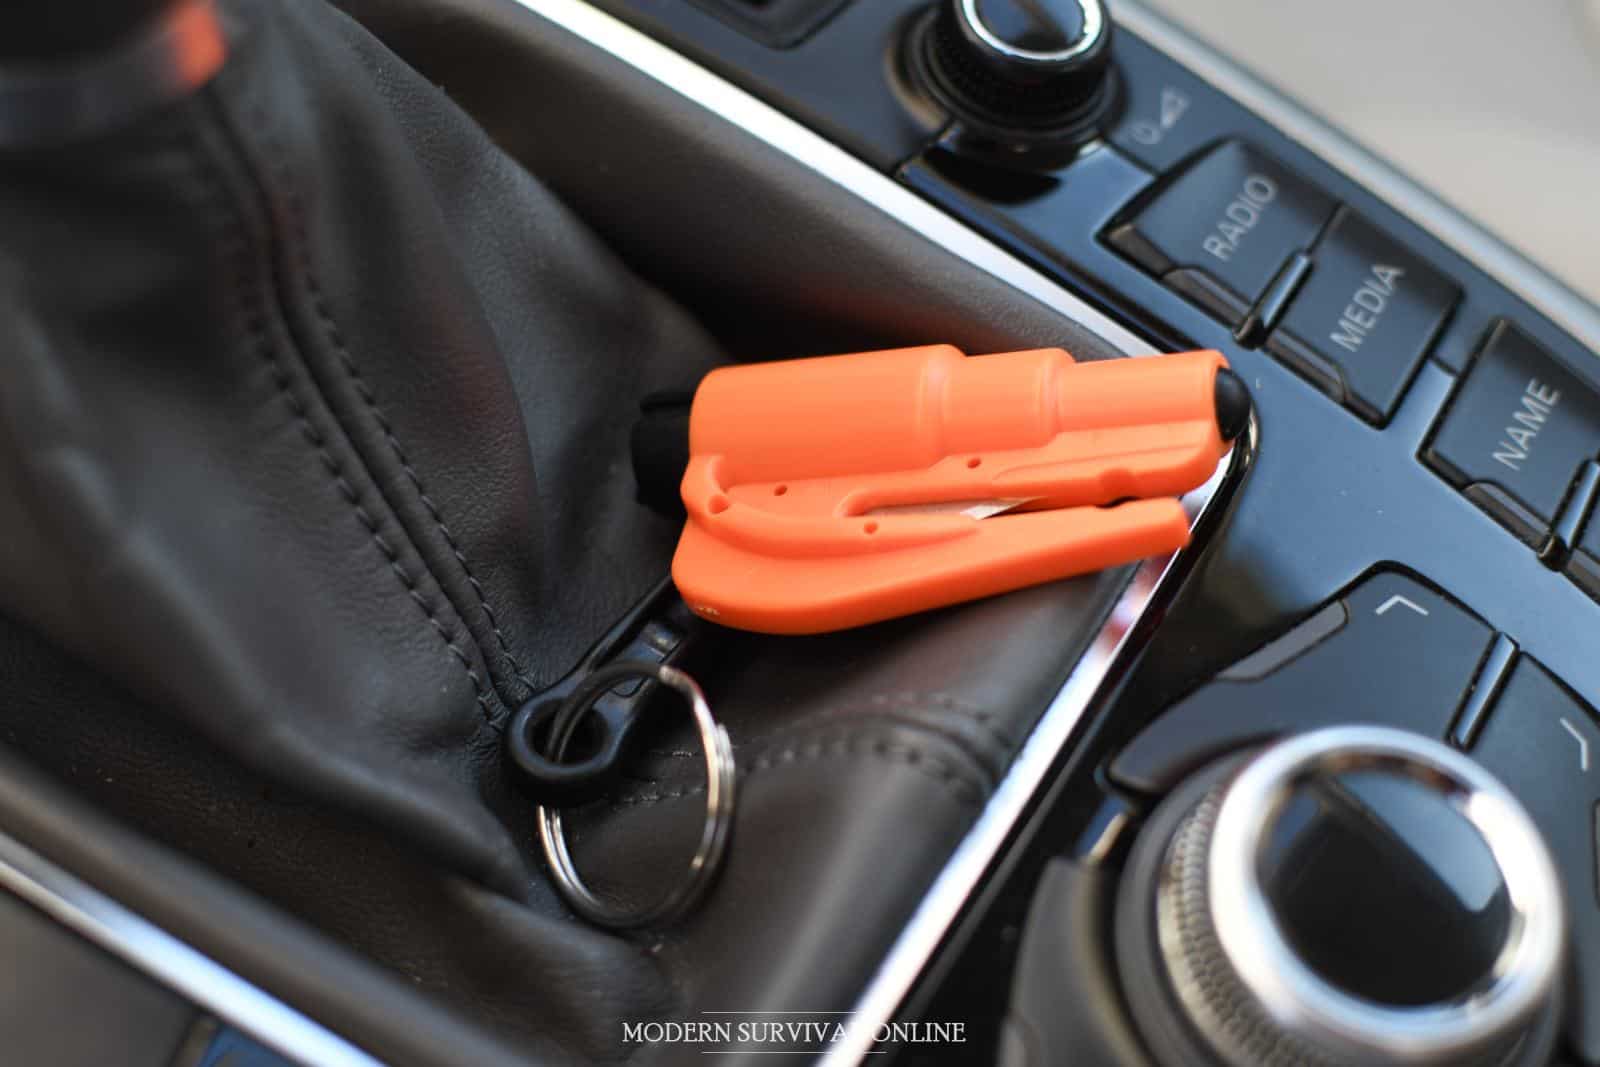 seatbelt cutter and window smasher 2-in-1 gadget